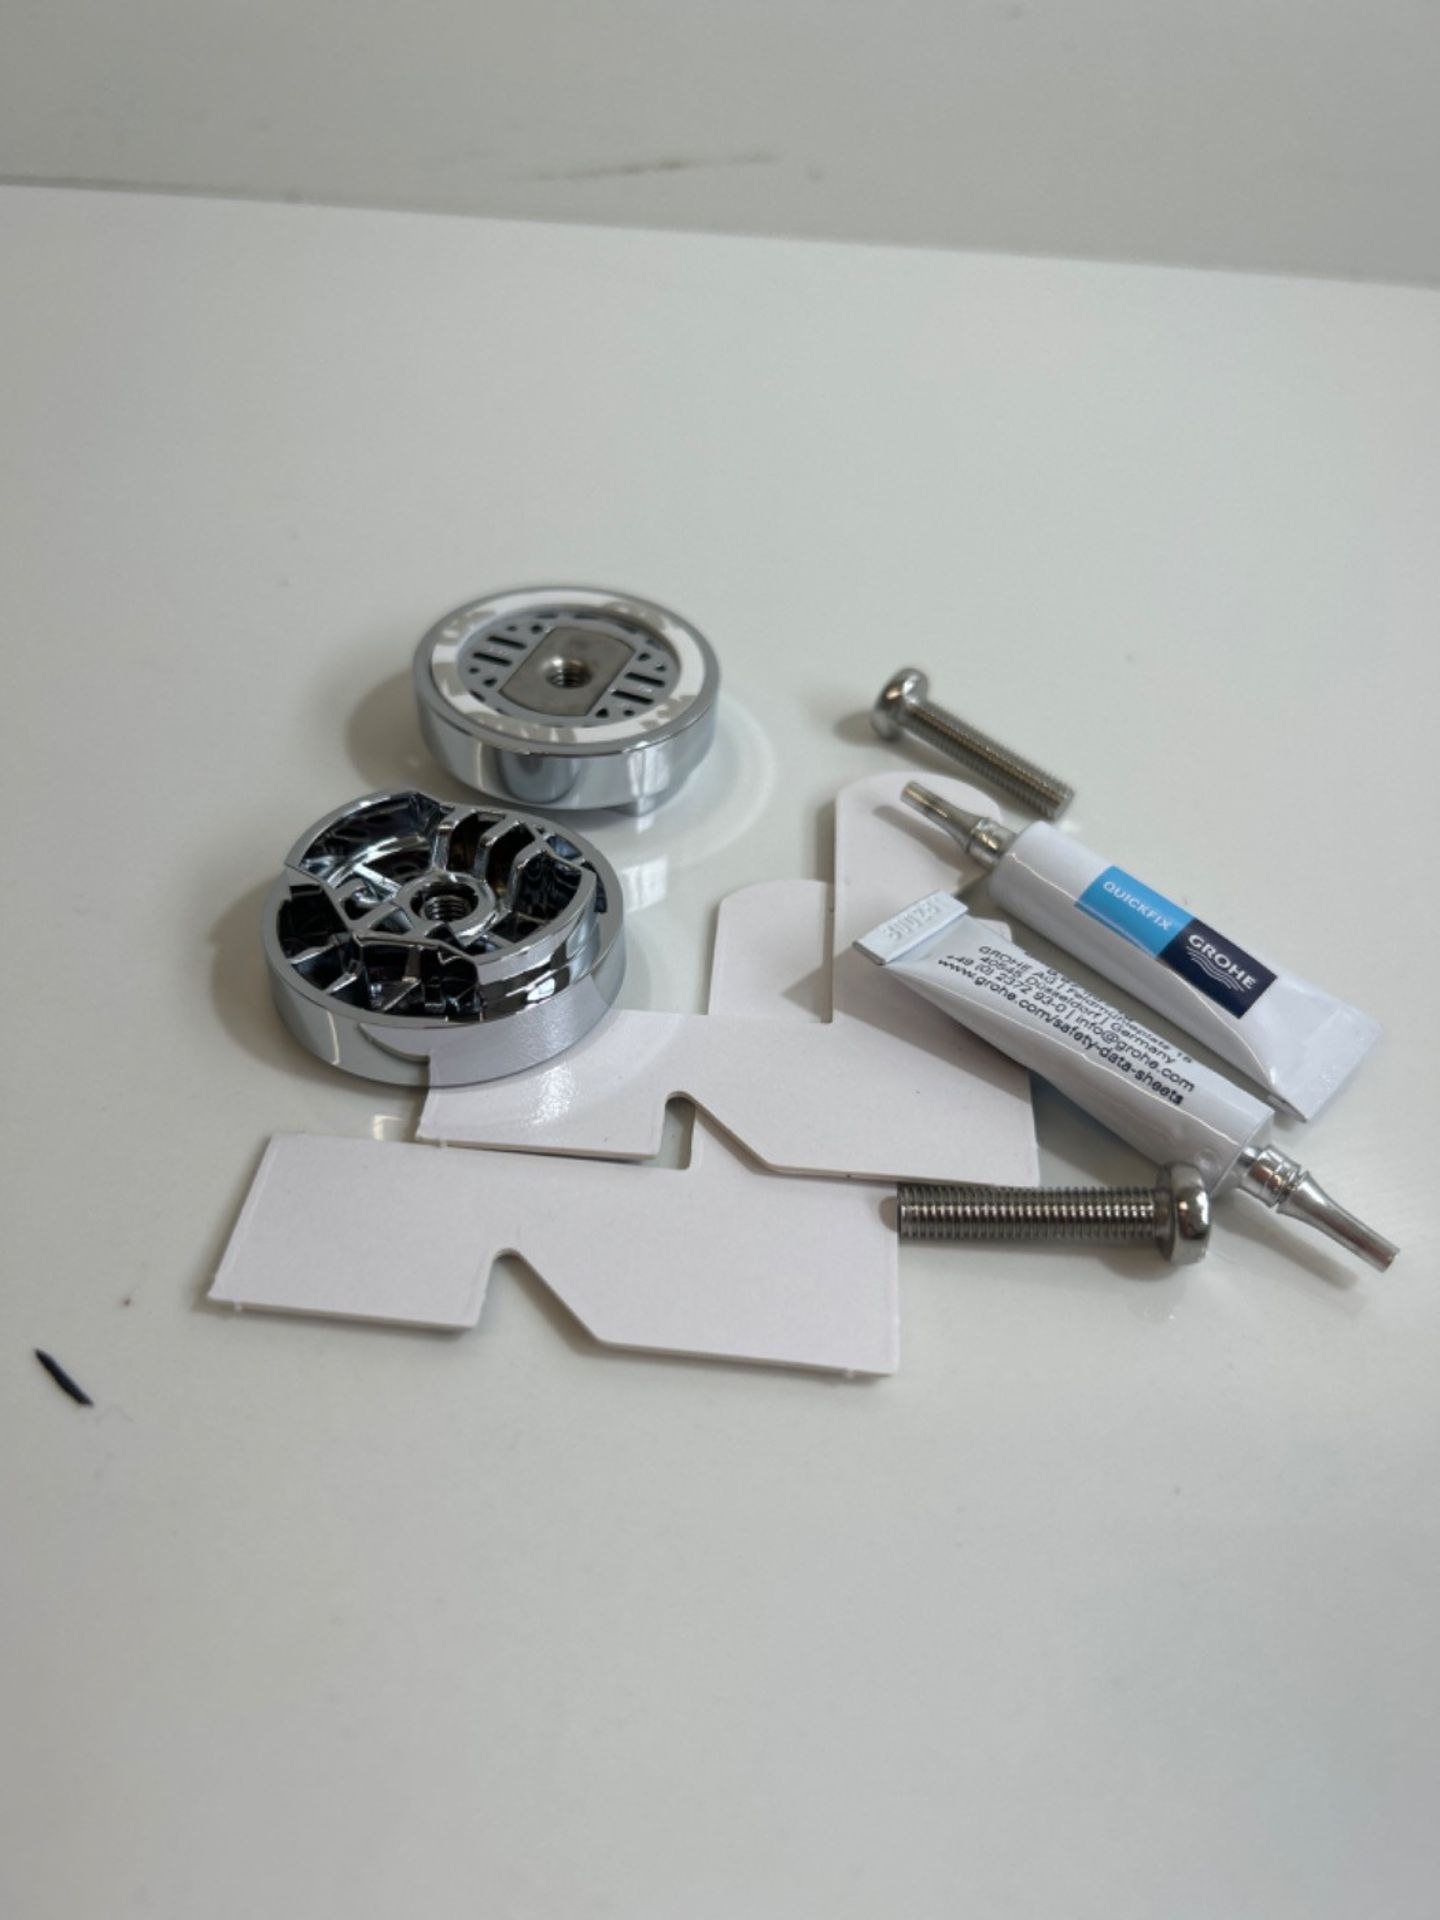 GROHE QuickGlue S2 Set with 2 Glues, 2 Mounting Templates, 2 Discs and 1 Alcohol Wipe for GROHE Qui - Image 3 of 3